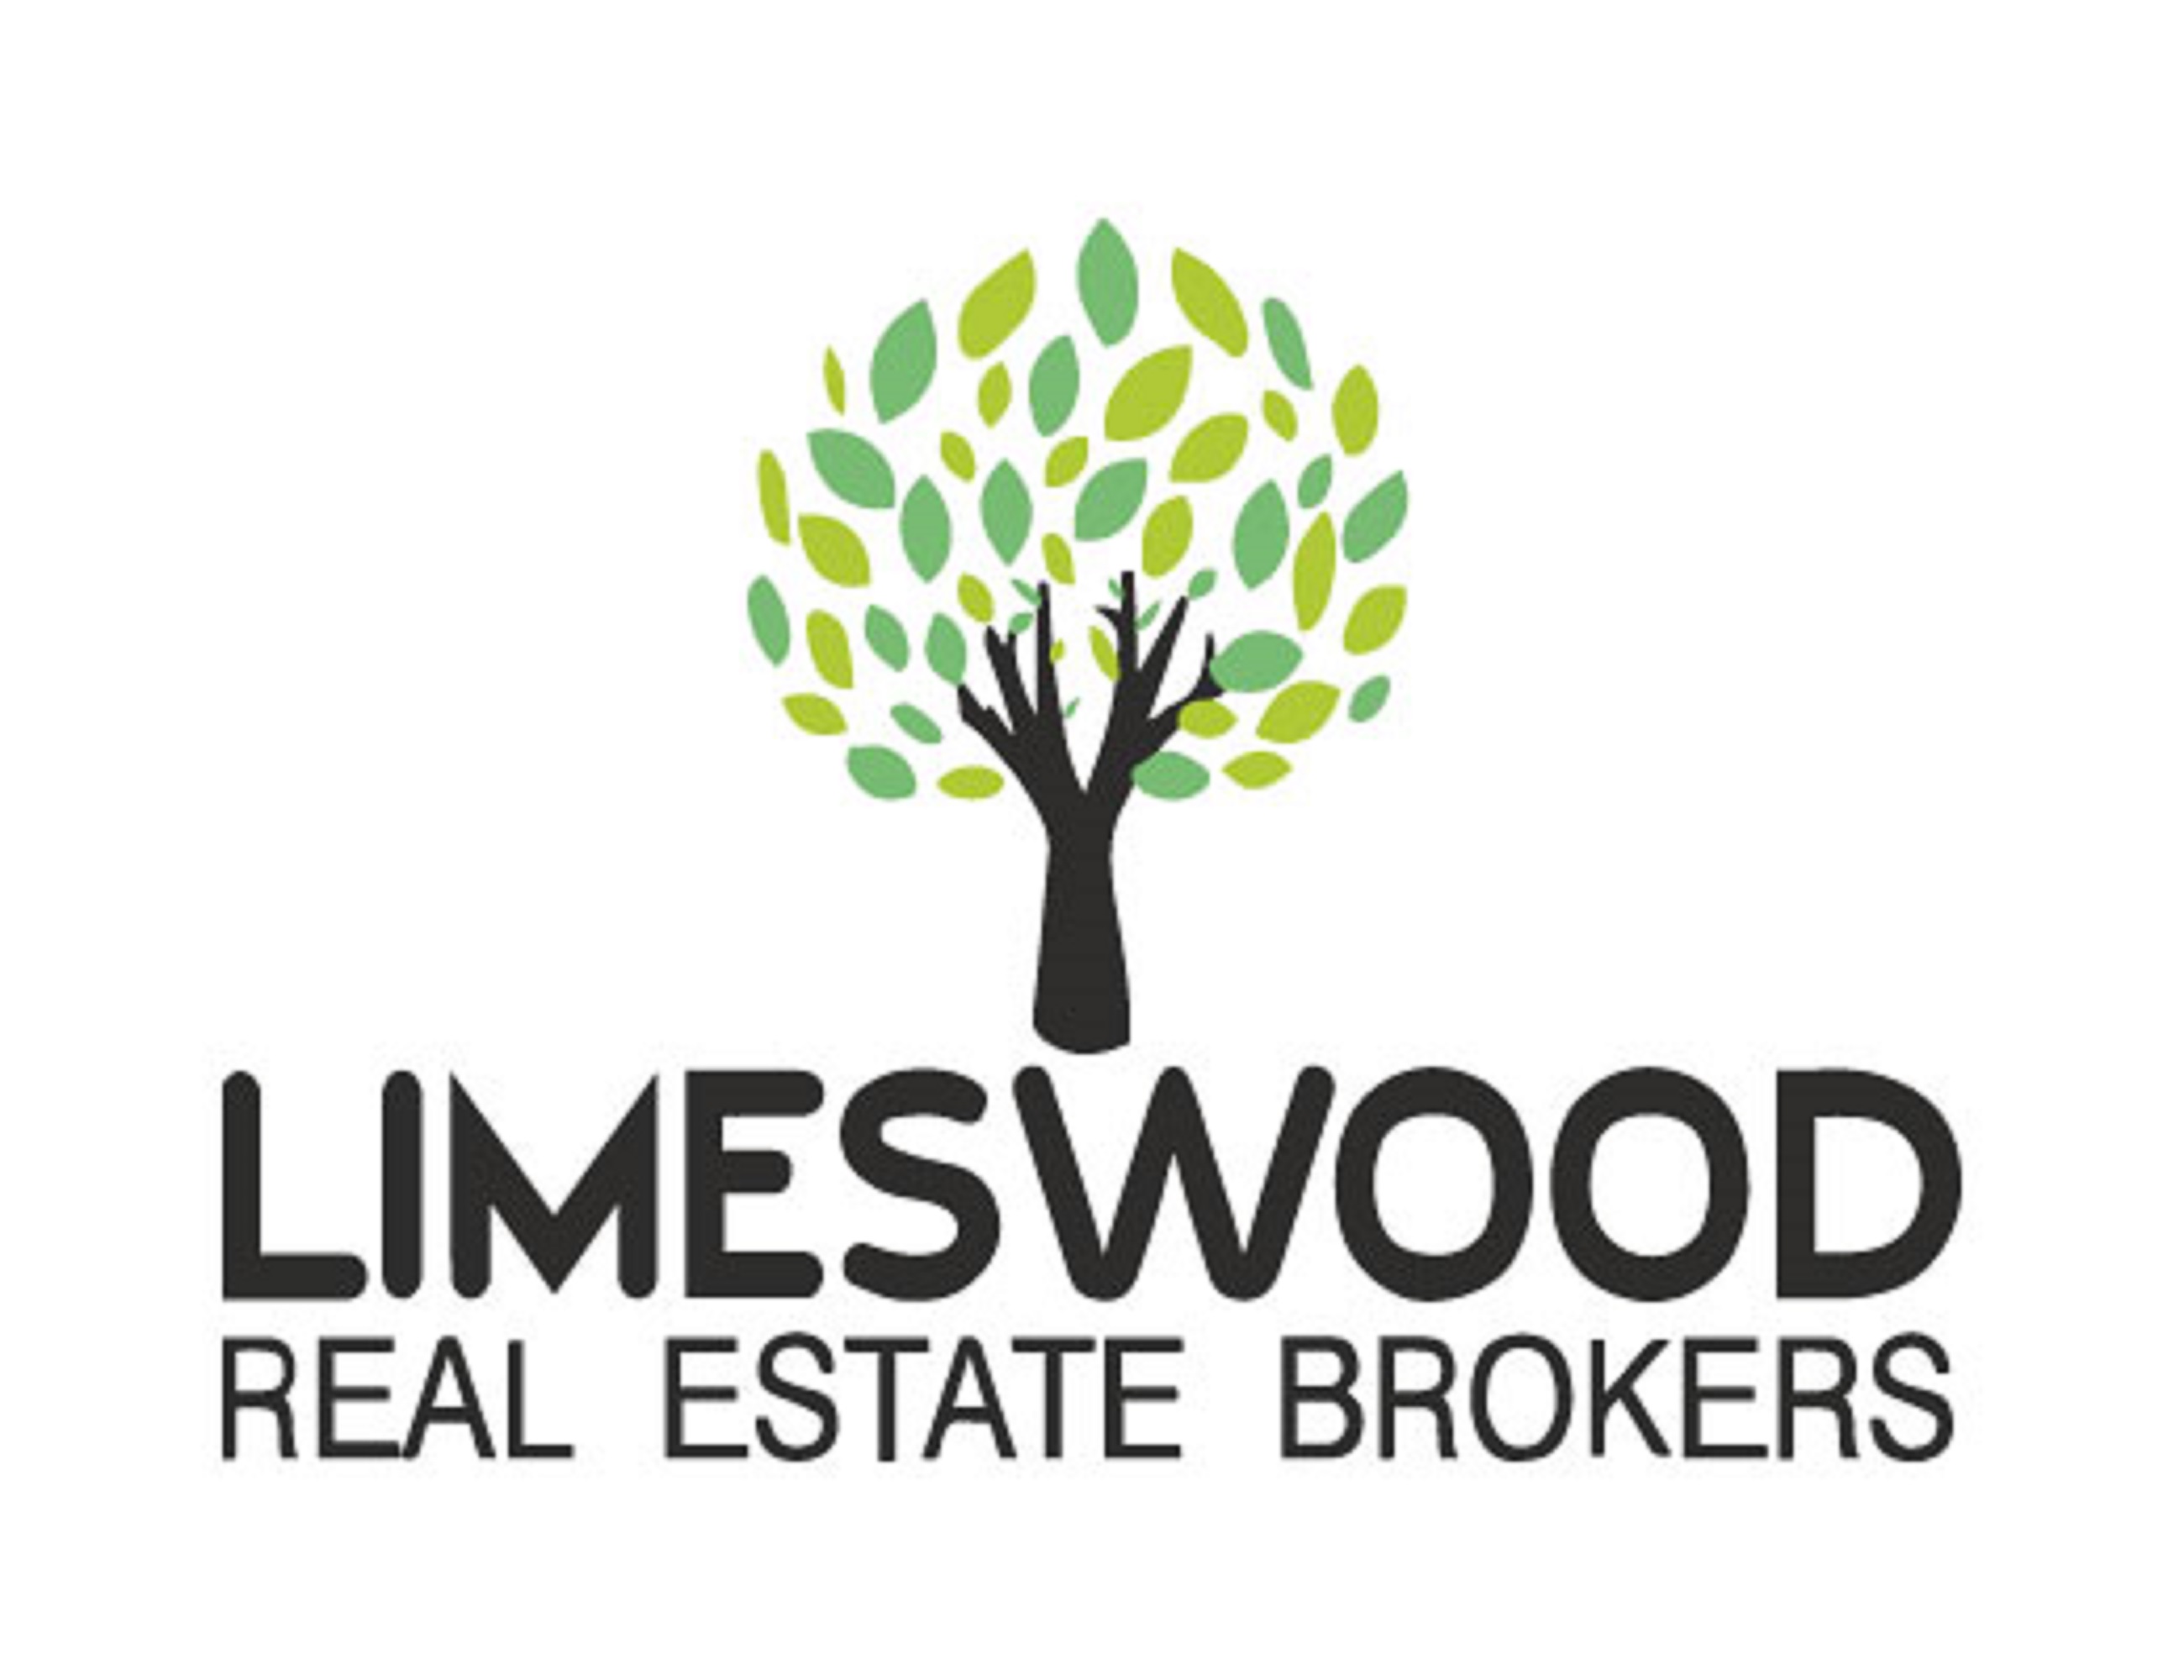 Limeswood Real Estate Brokers